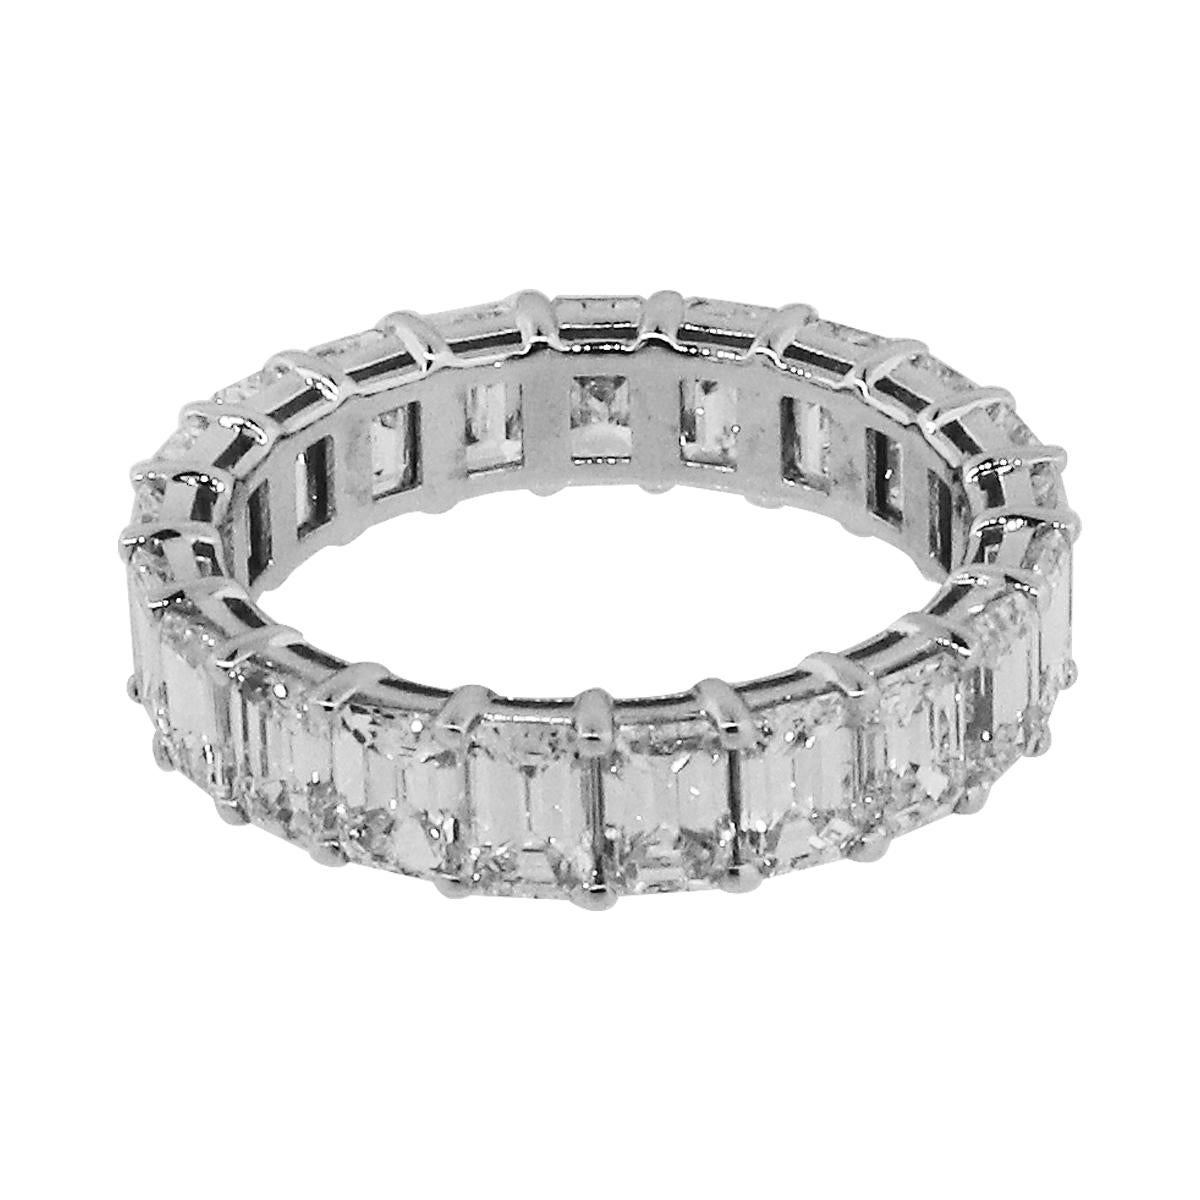 Material: 18k White Gold
Diamond Details: Total of 21 Diamonds. Approximately 5.32ctw emerald cut diamonds. Diamonds are G/H in color and VS in clarity
Ring Size: 6.5
Ring Measurements: 0.80″ x 0.16″ x 0.80″
Total Weight: 3.3g (2.1dwt)
SKU: A30312786